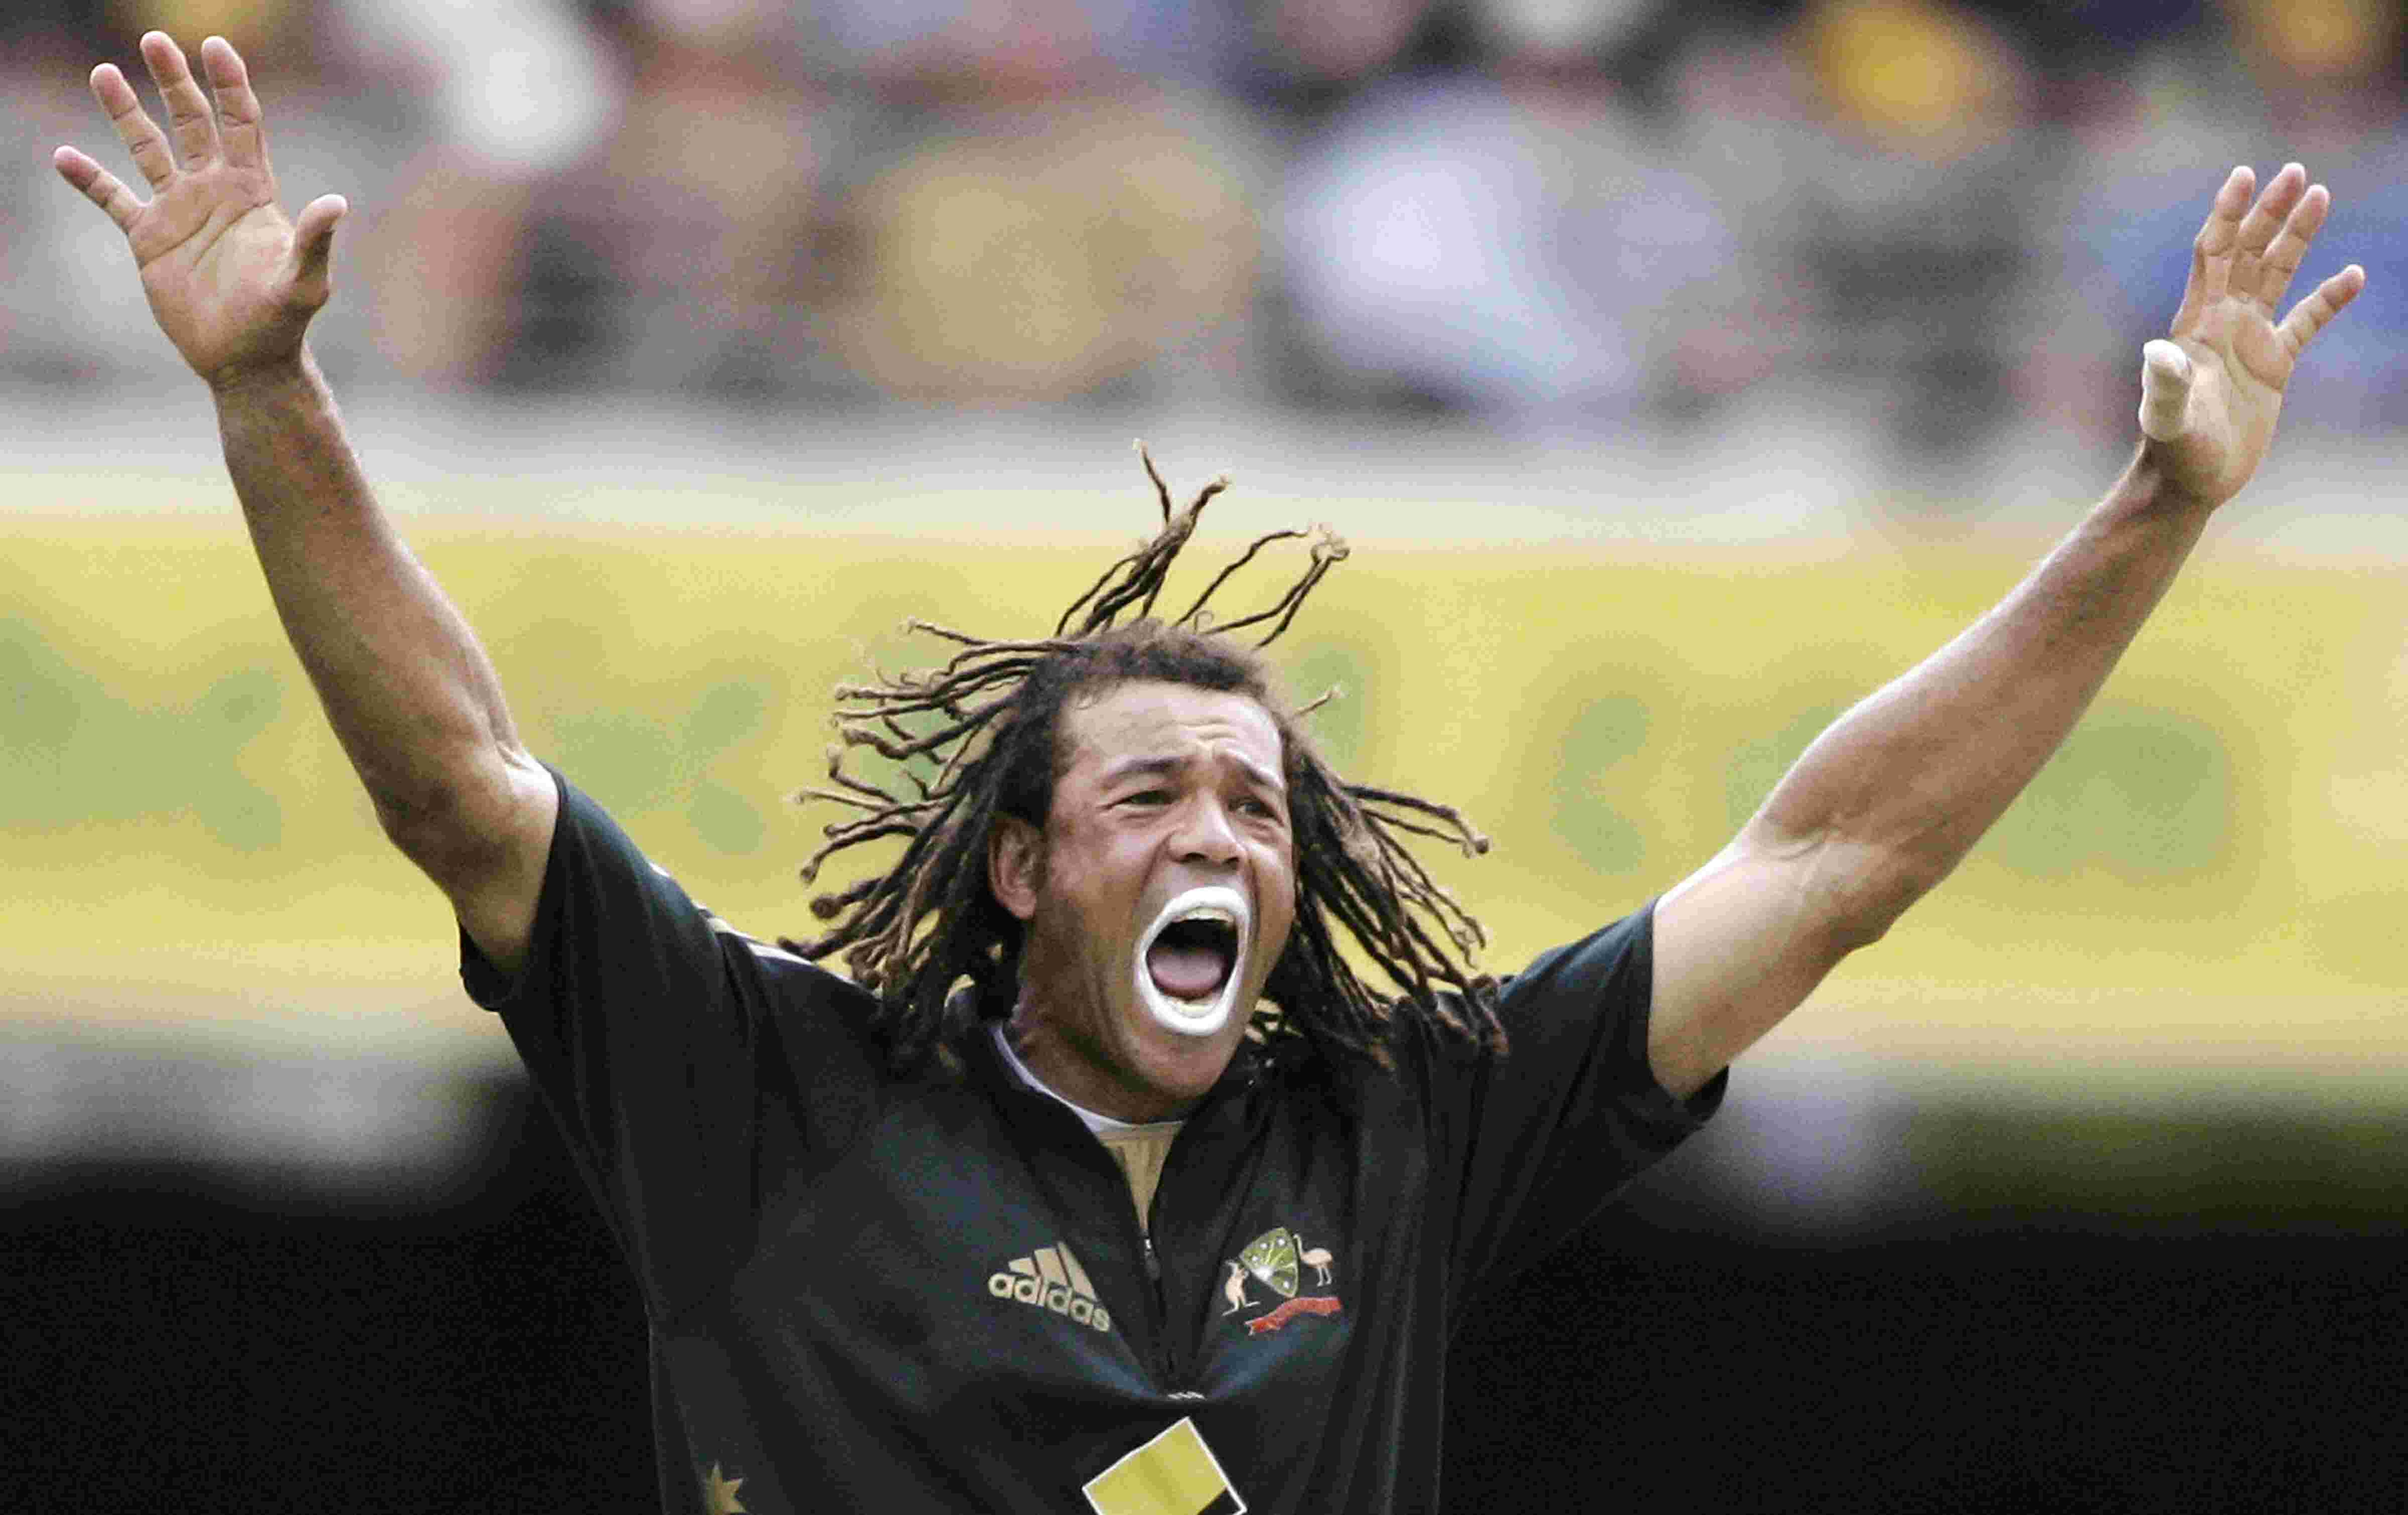 Utterly devastated: Cricket world pay tribute to Andrew Symonds